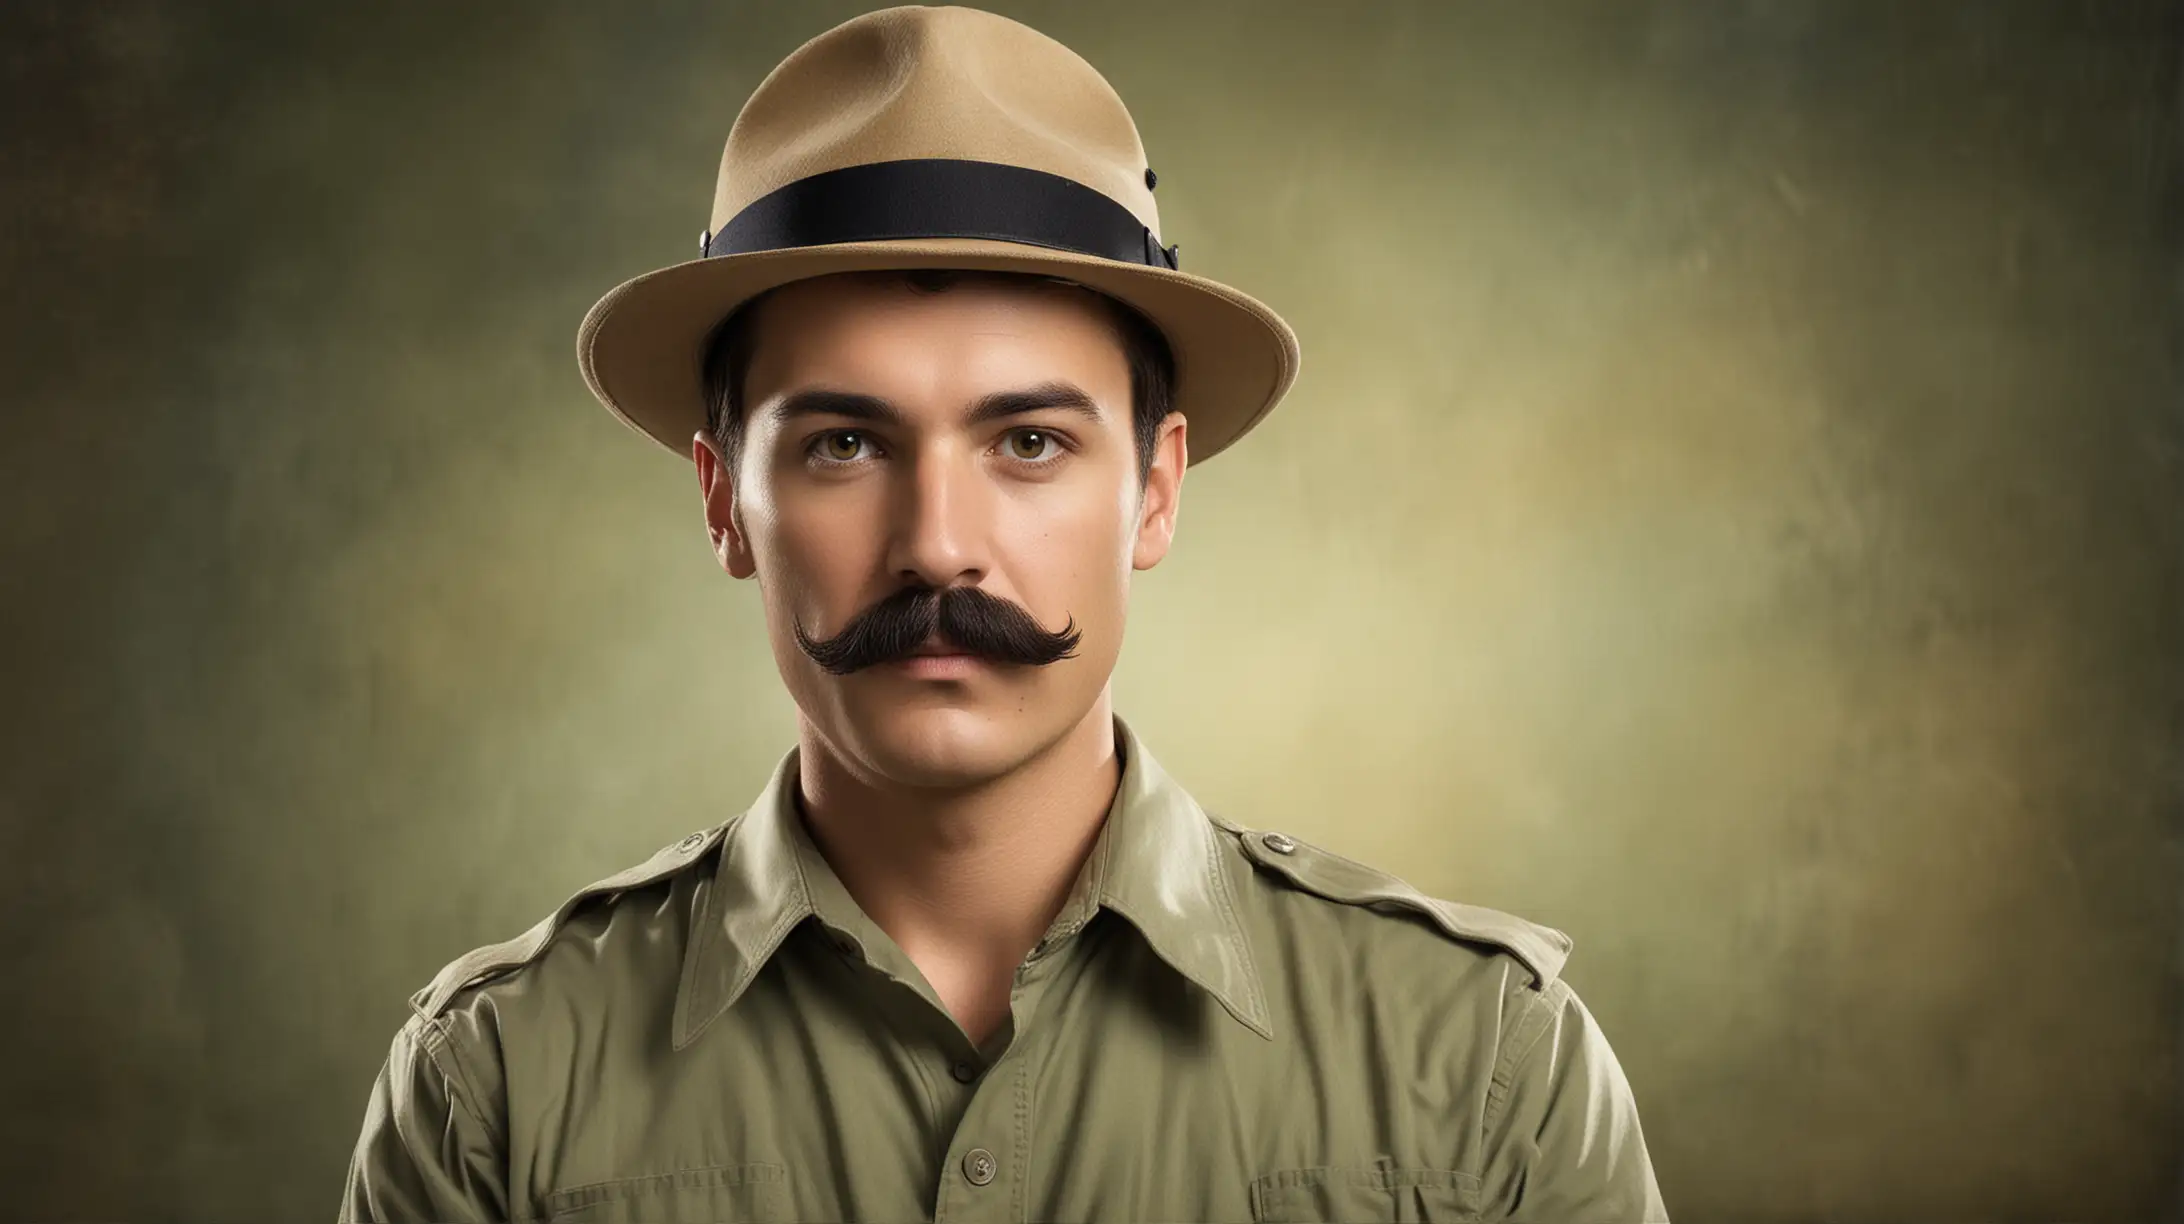 Zookeeper in Campaign Hat with Mustache in Natural Zoo Setting